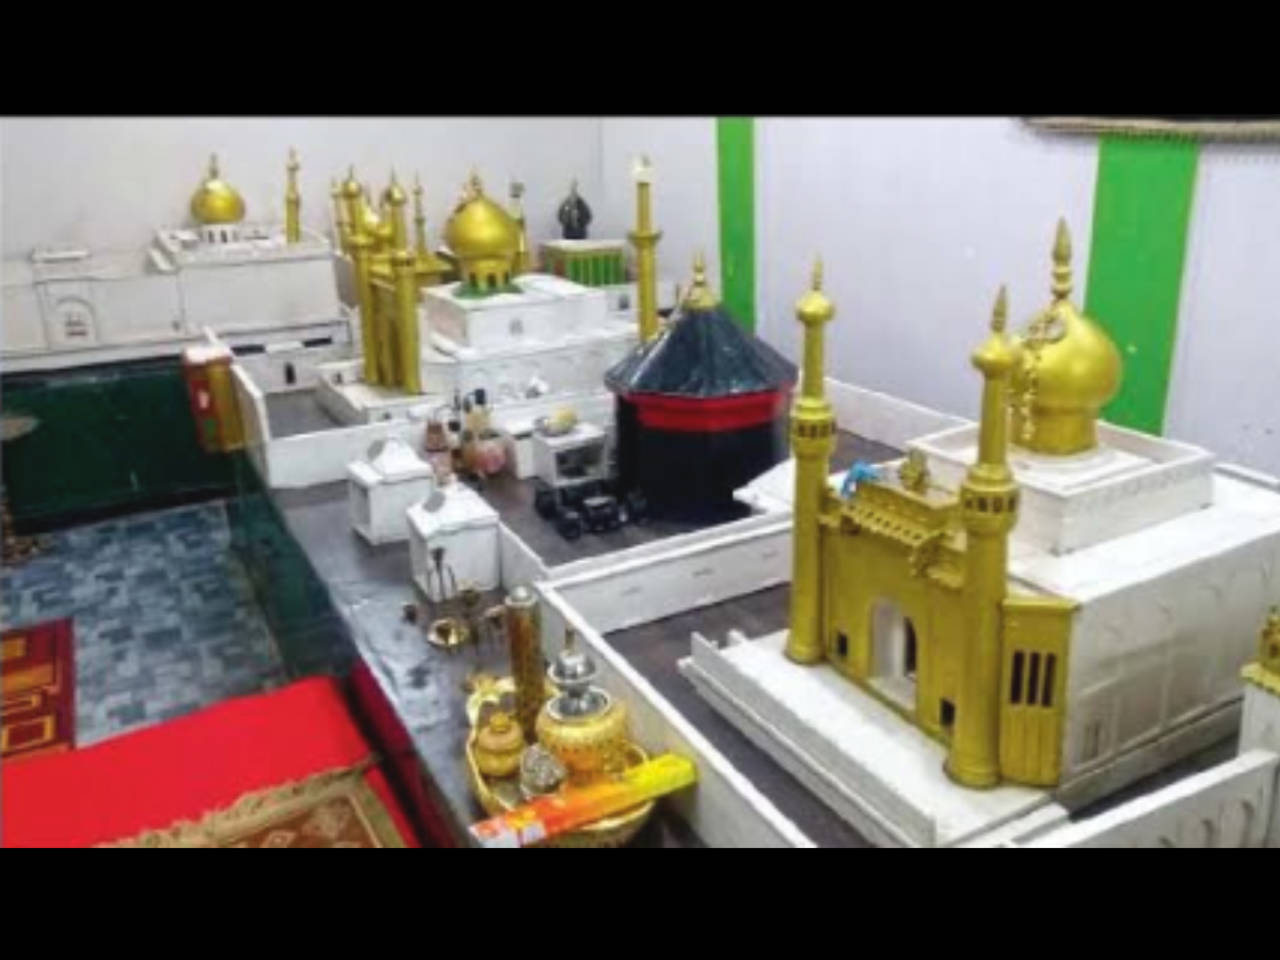 When Karbala was carved in a dream in Hyderabad | Hyderabad News ...